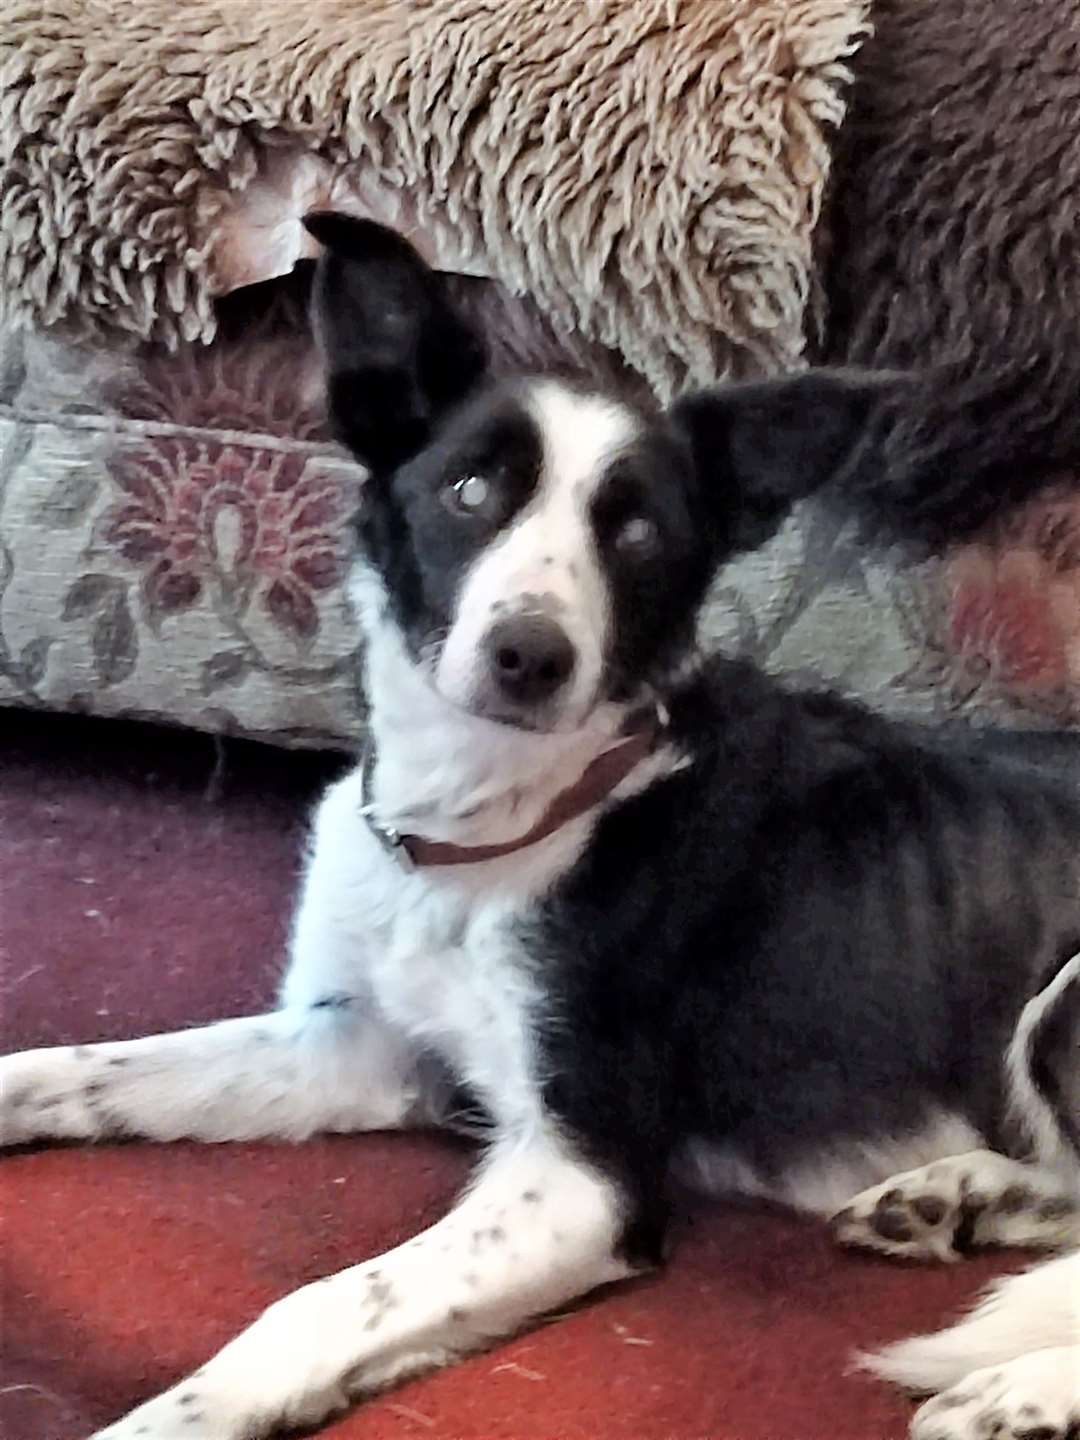 Jim's collie dog Daisy that he got from Wick-based charity KWK9. Daisy has diabetes and cataracts in her eyes now but Jim says she is still enjoying life to the full.